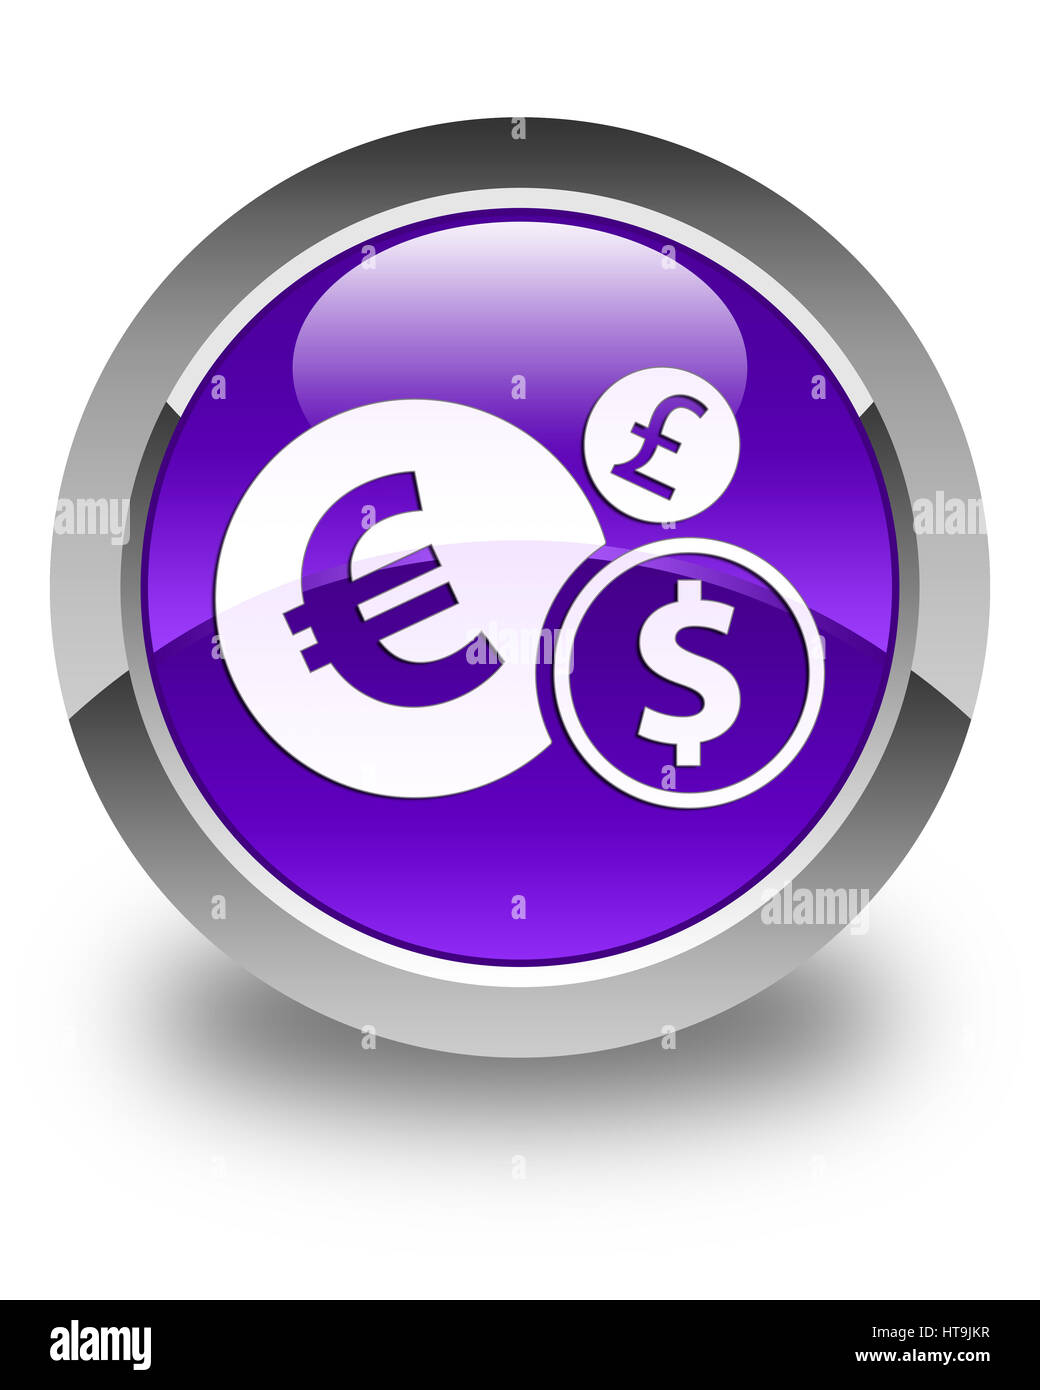 Finances icon isolated on glossy purple round button abstract illustration Stock Photo